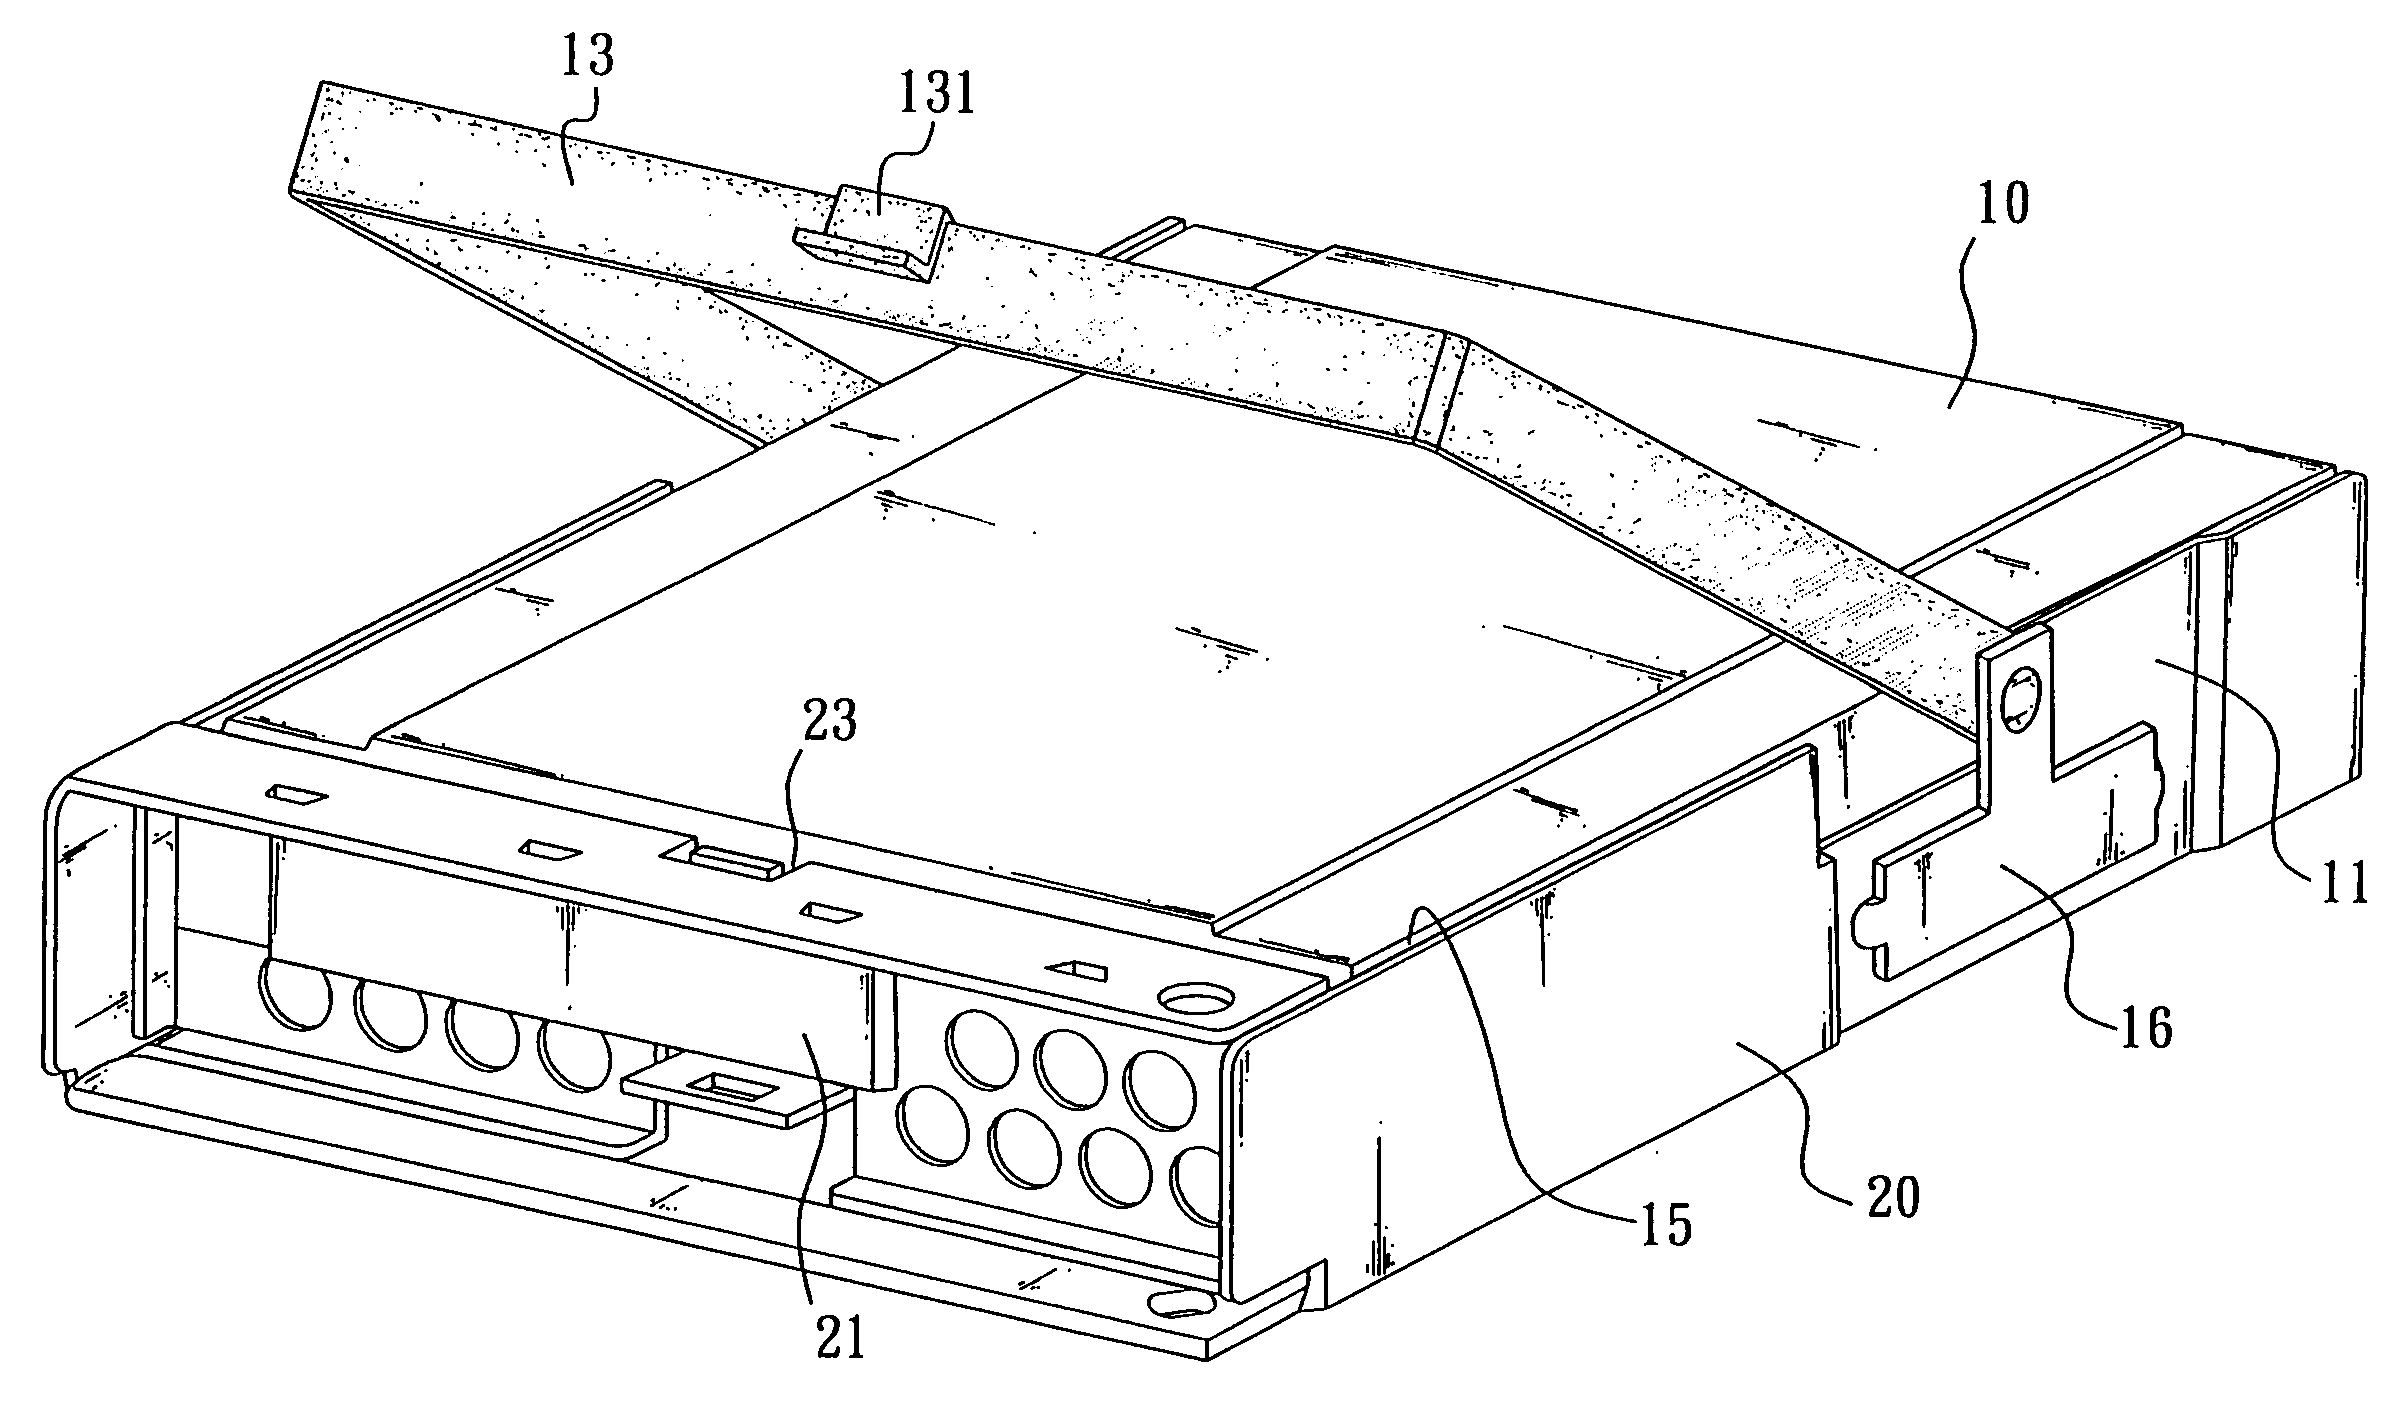 Mechanism for rapidly installing and detaching hard disk